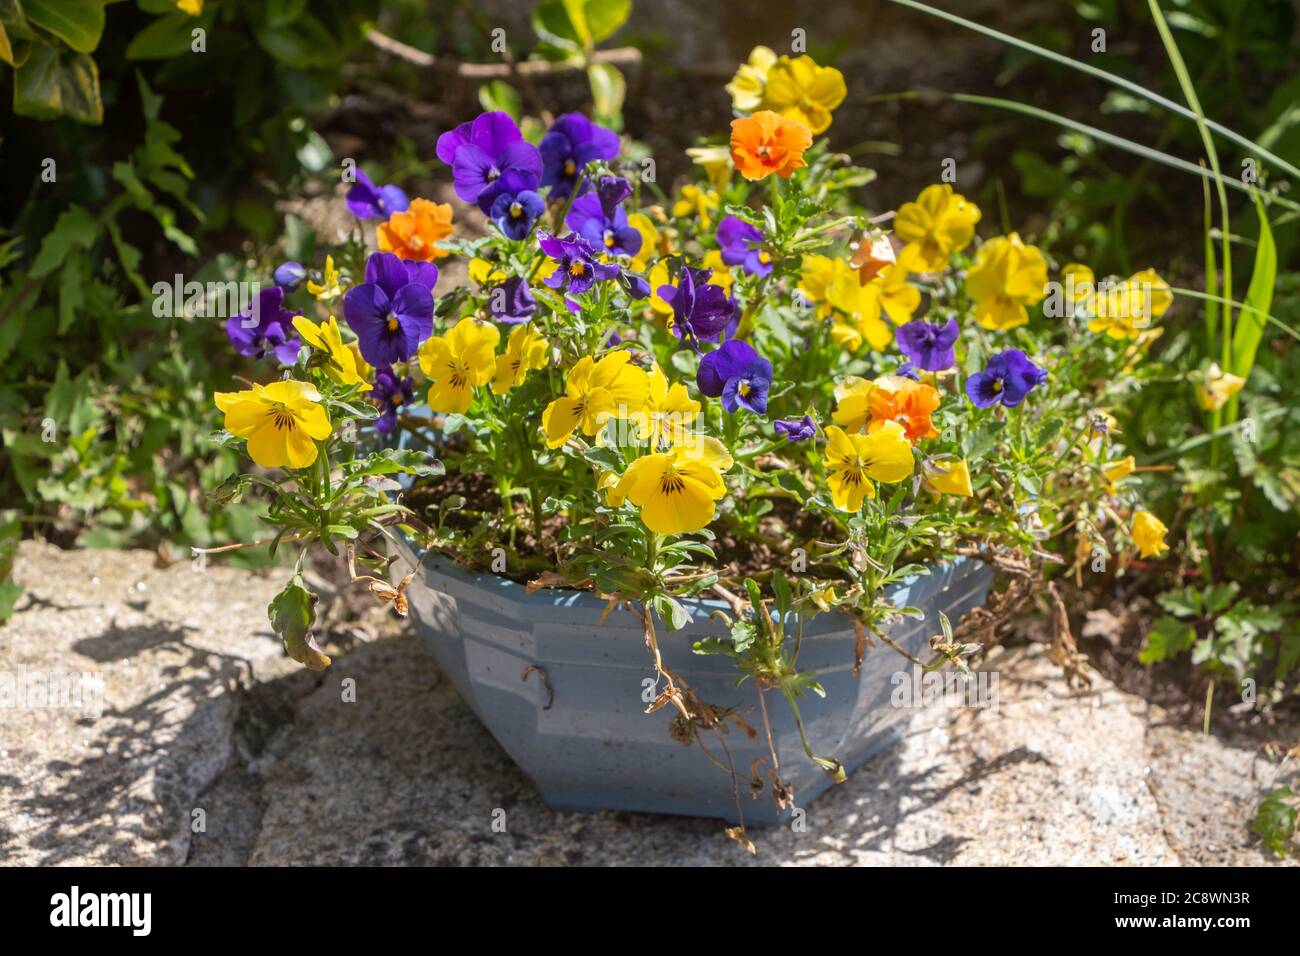 Pansy flowers in a flowerpot in a garden during spring Stock Photo